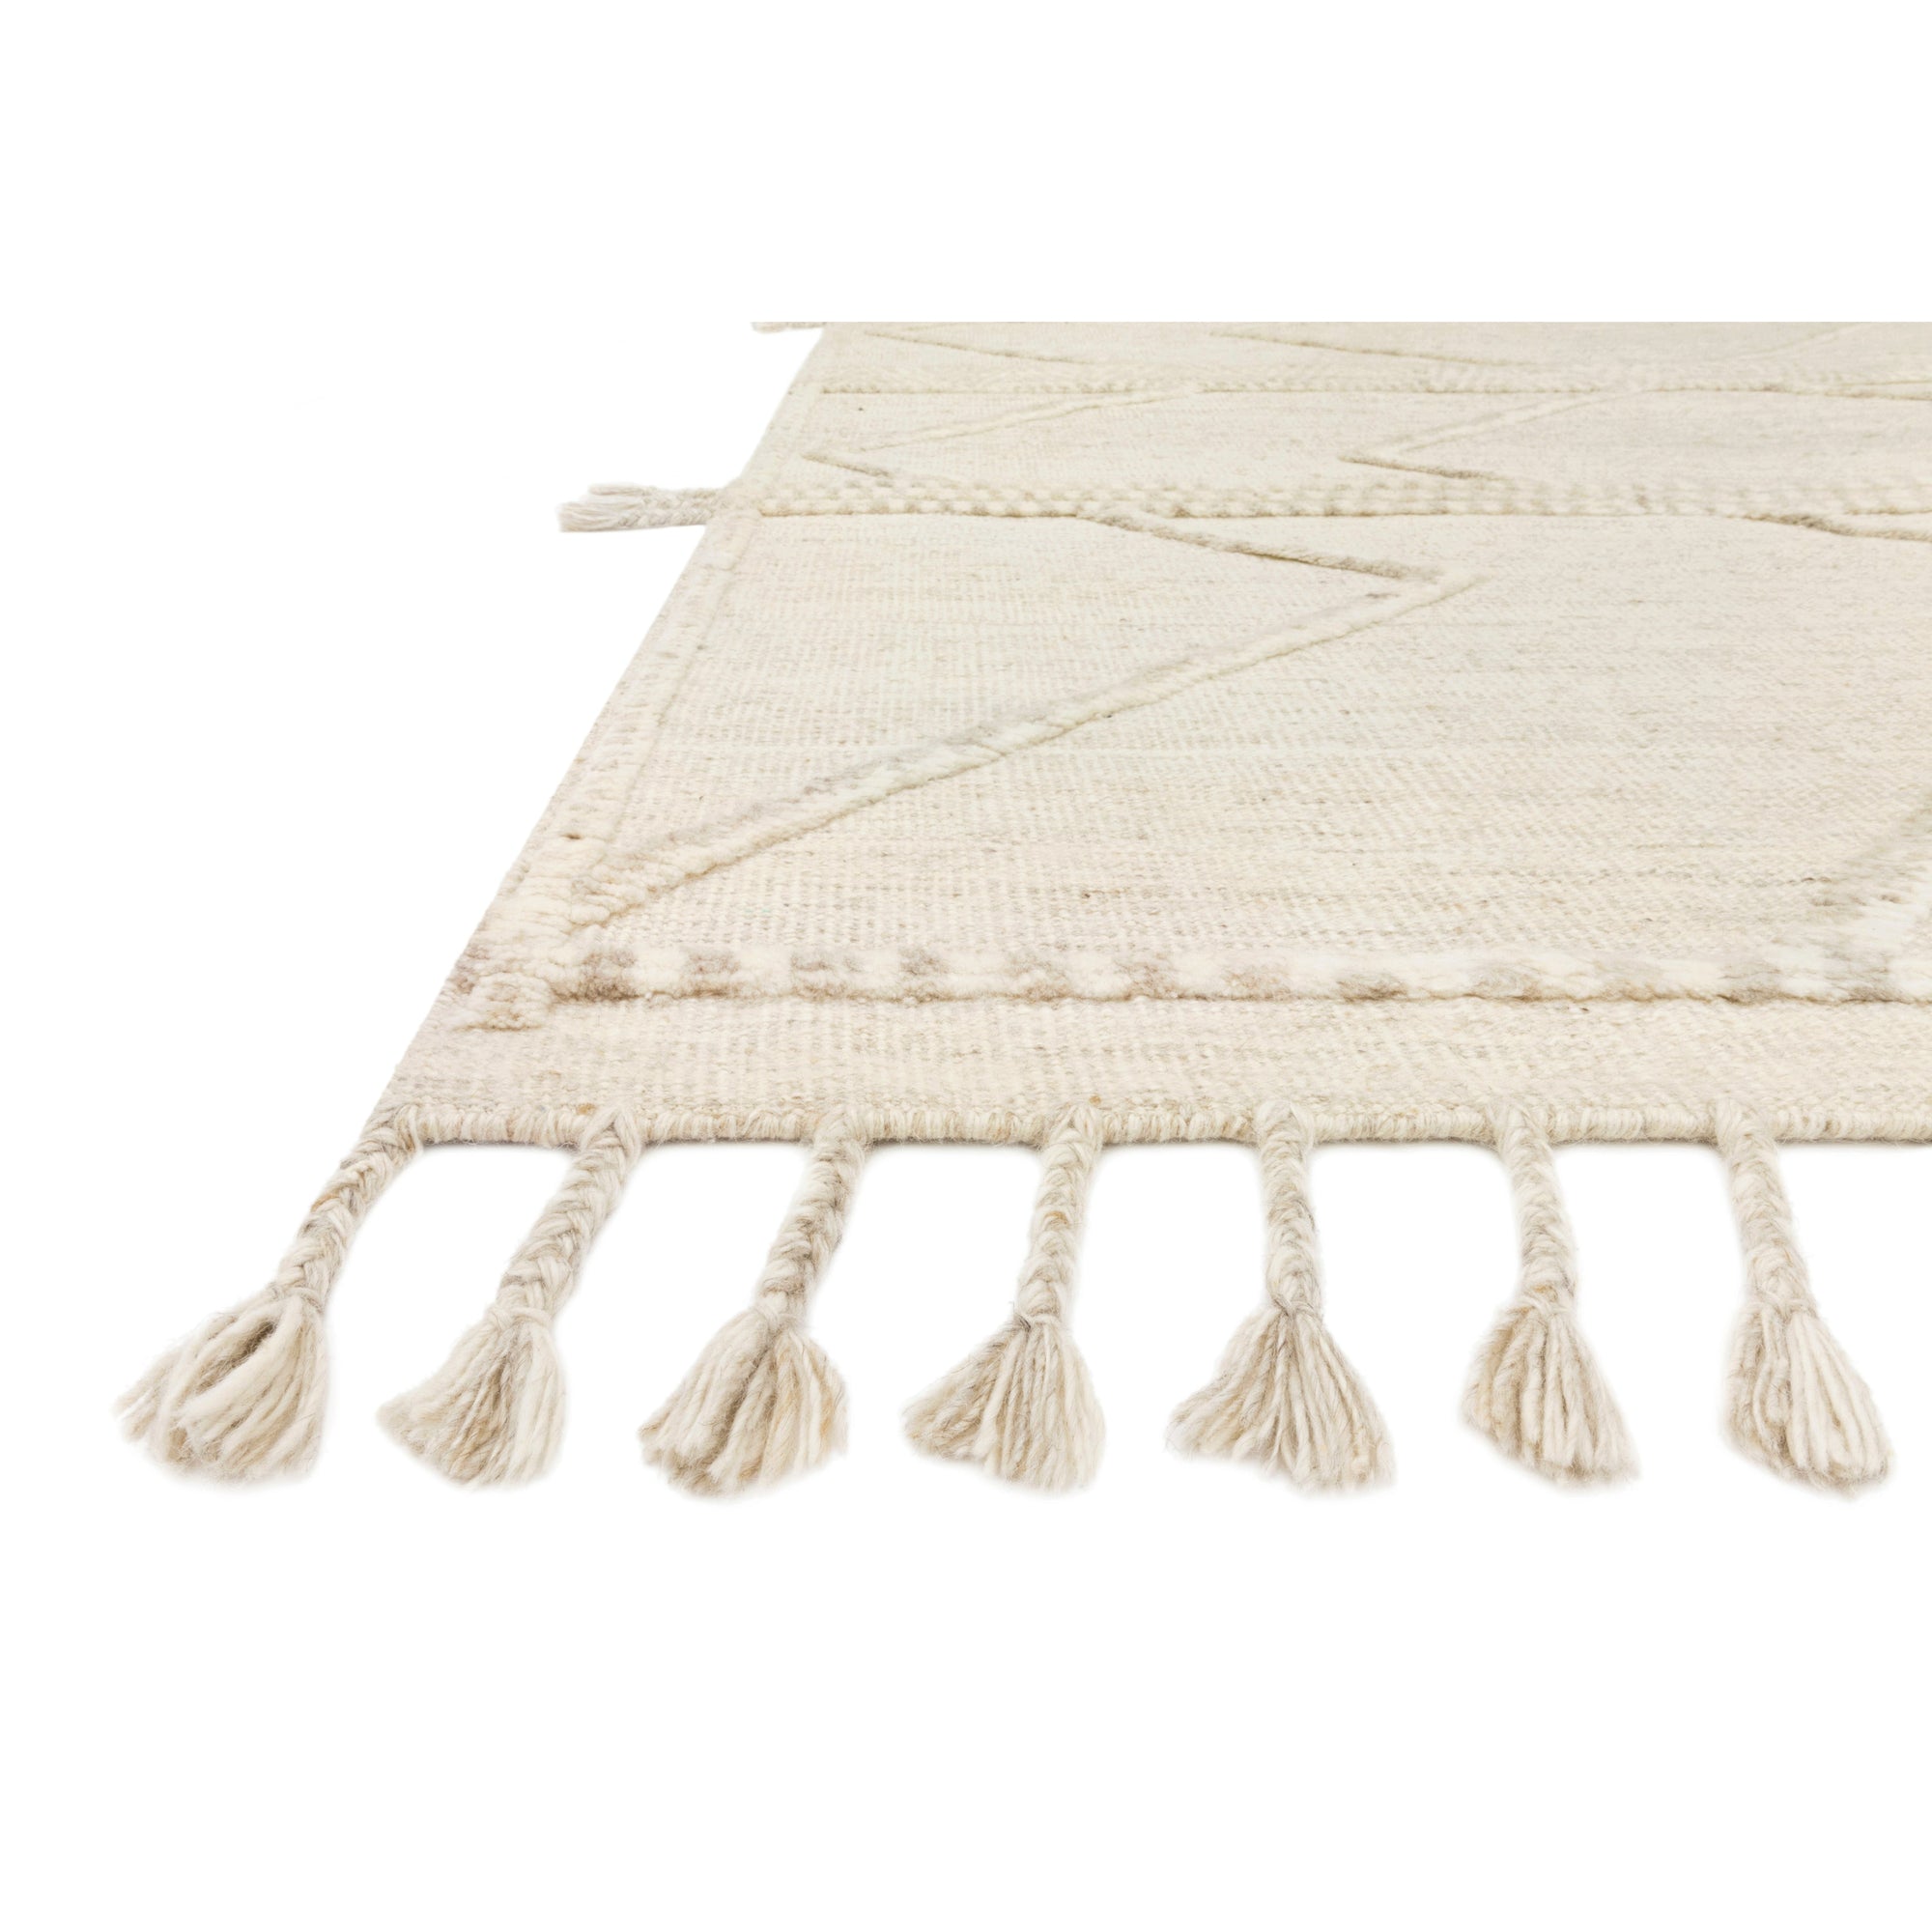 Rugs by Roo Loloi Iman Beige Ivory Area Rug in size 18" x 18" Sample